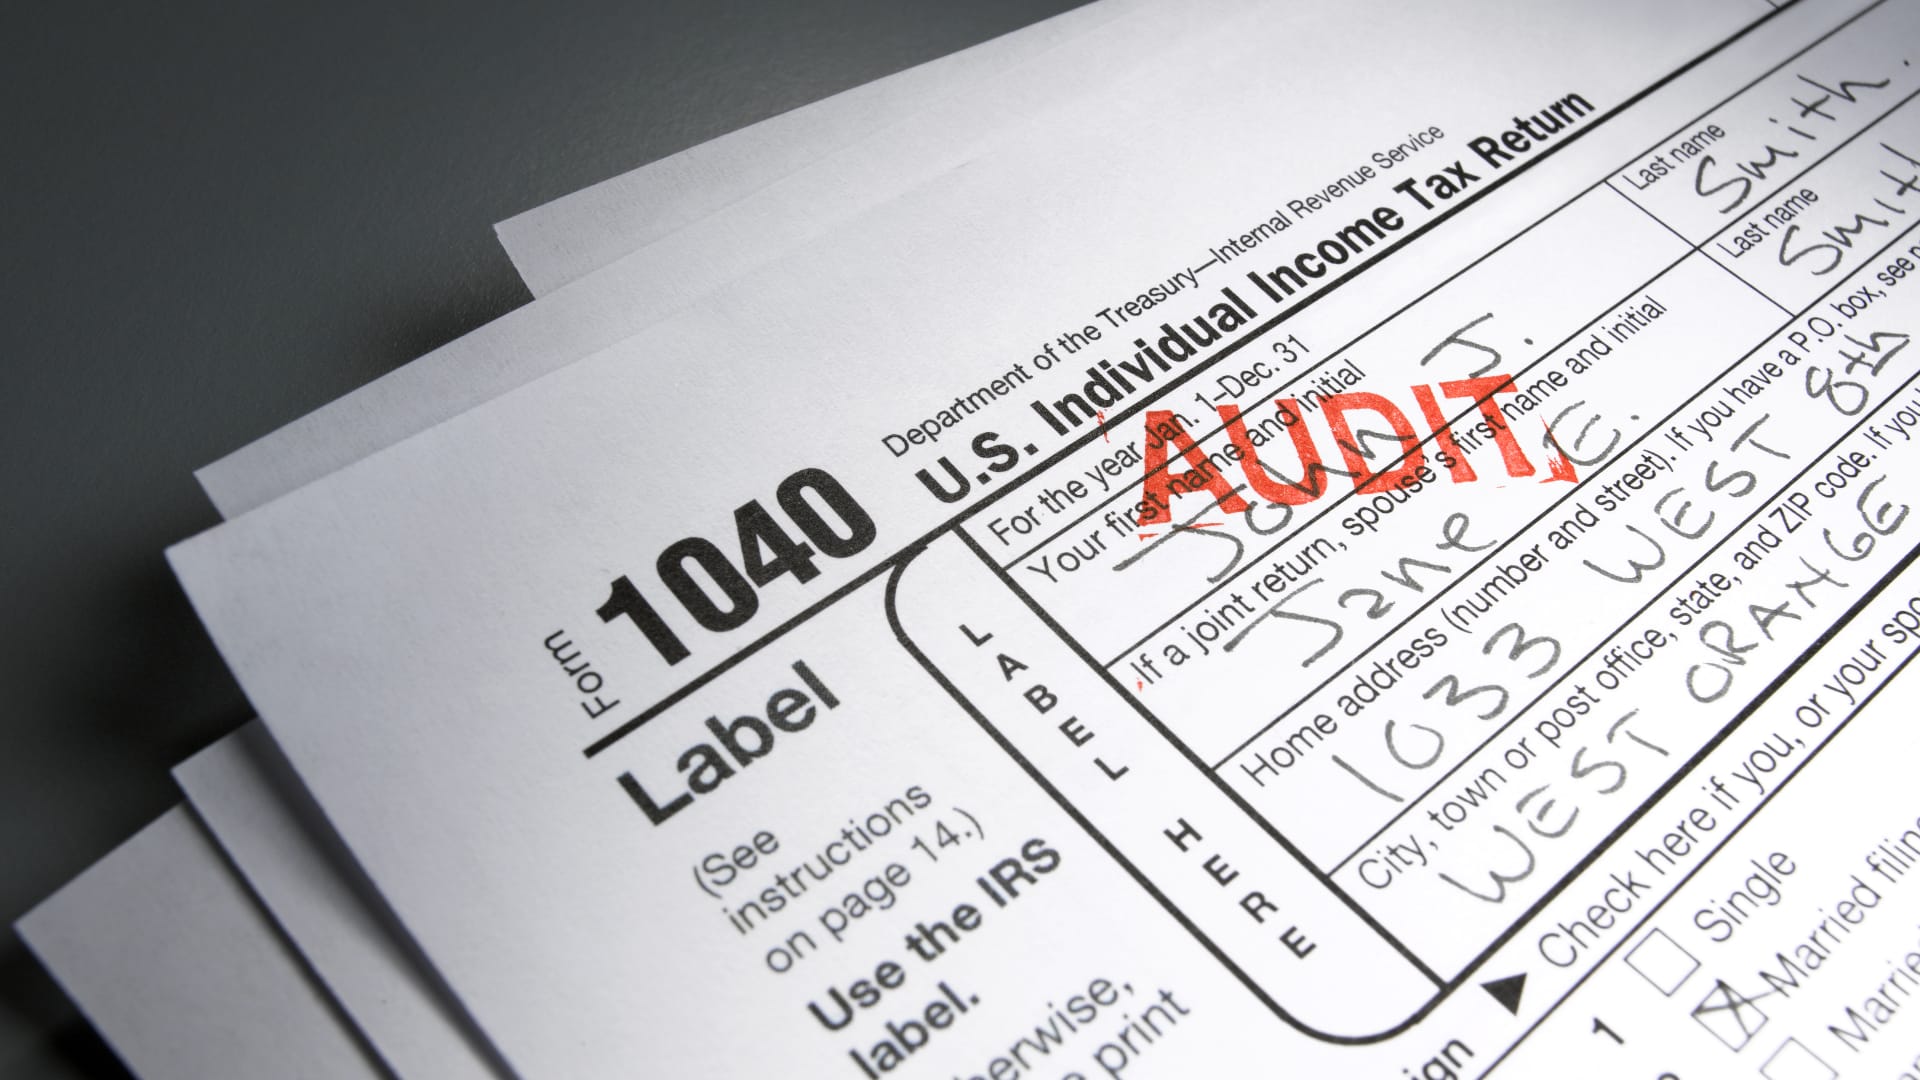 With 87,000 new agents, here's who the IRS may target for audits